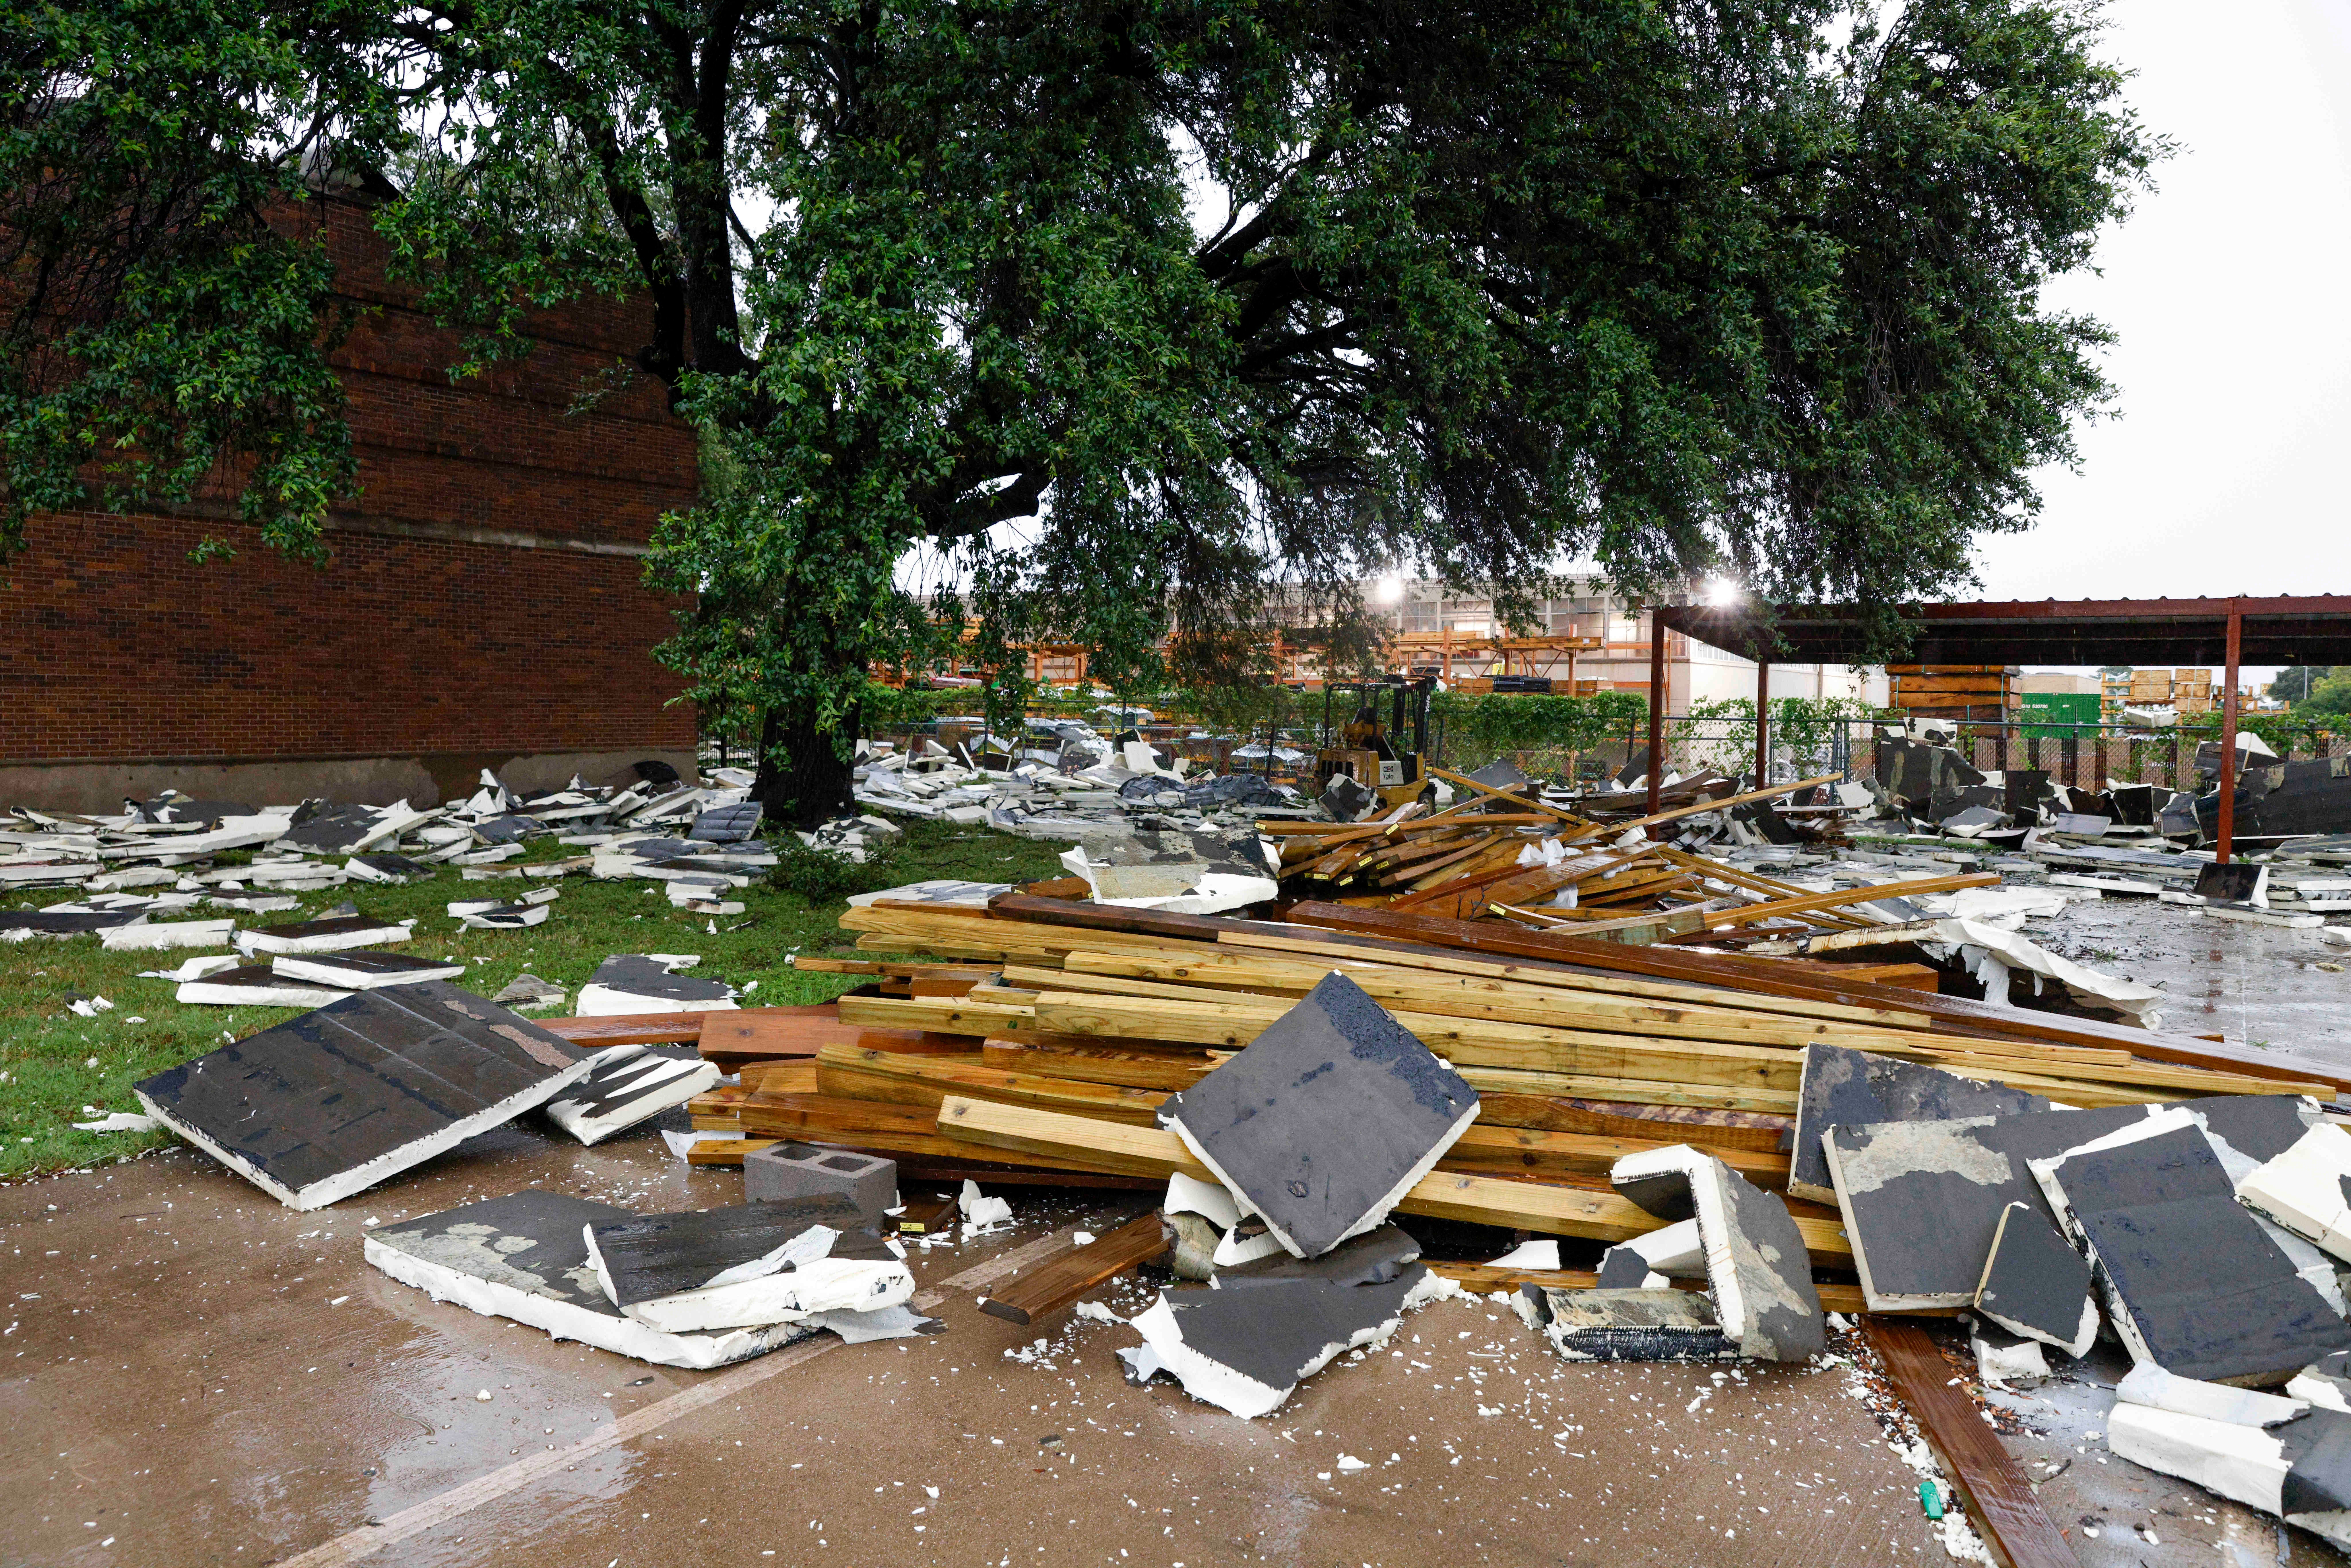 A Rainbow Hardware store is pictured in Dallas, Texas, after destructive thunderstorms ripped through the region, leaving more than a million people without power across the state.